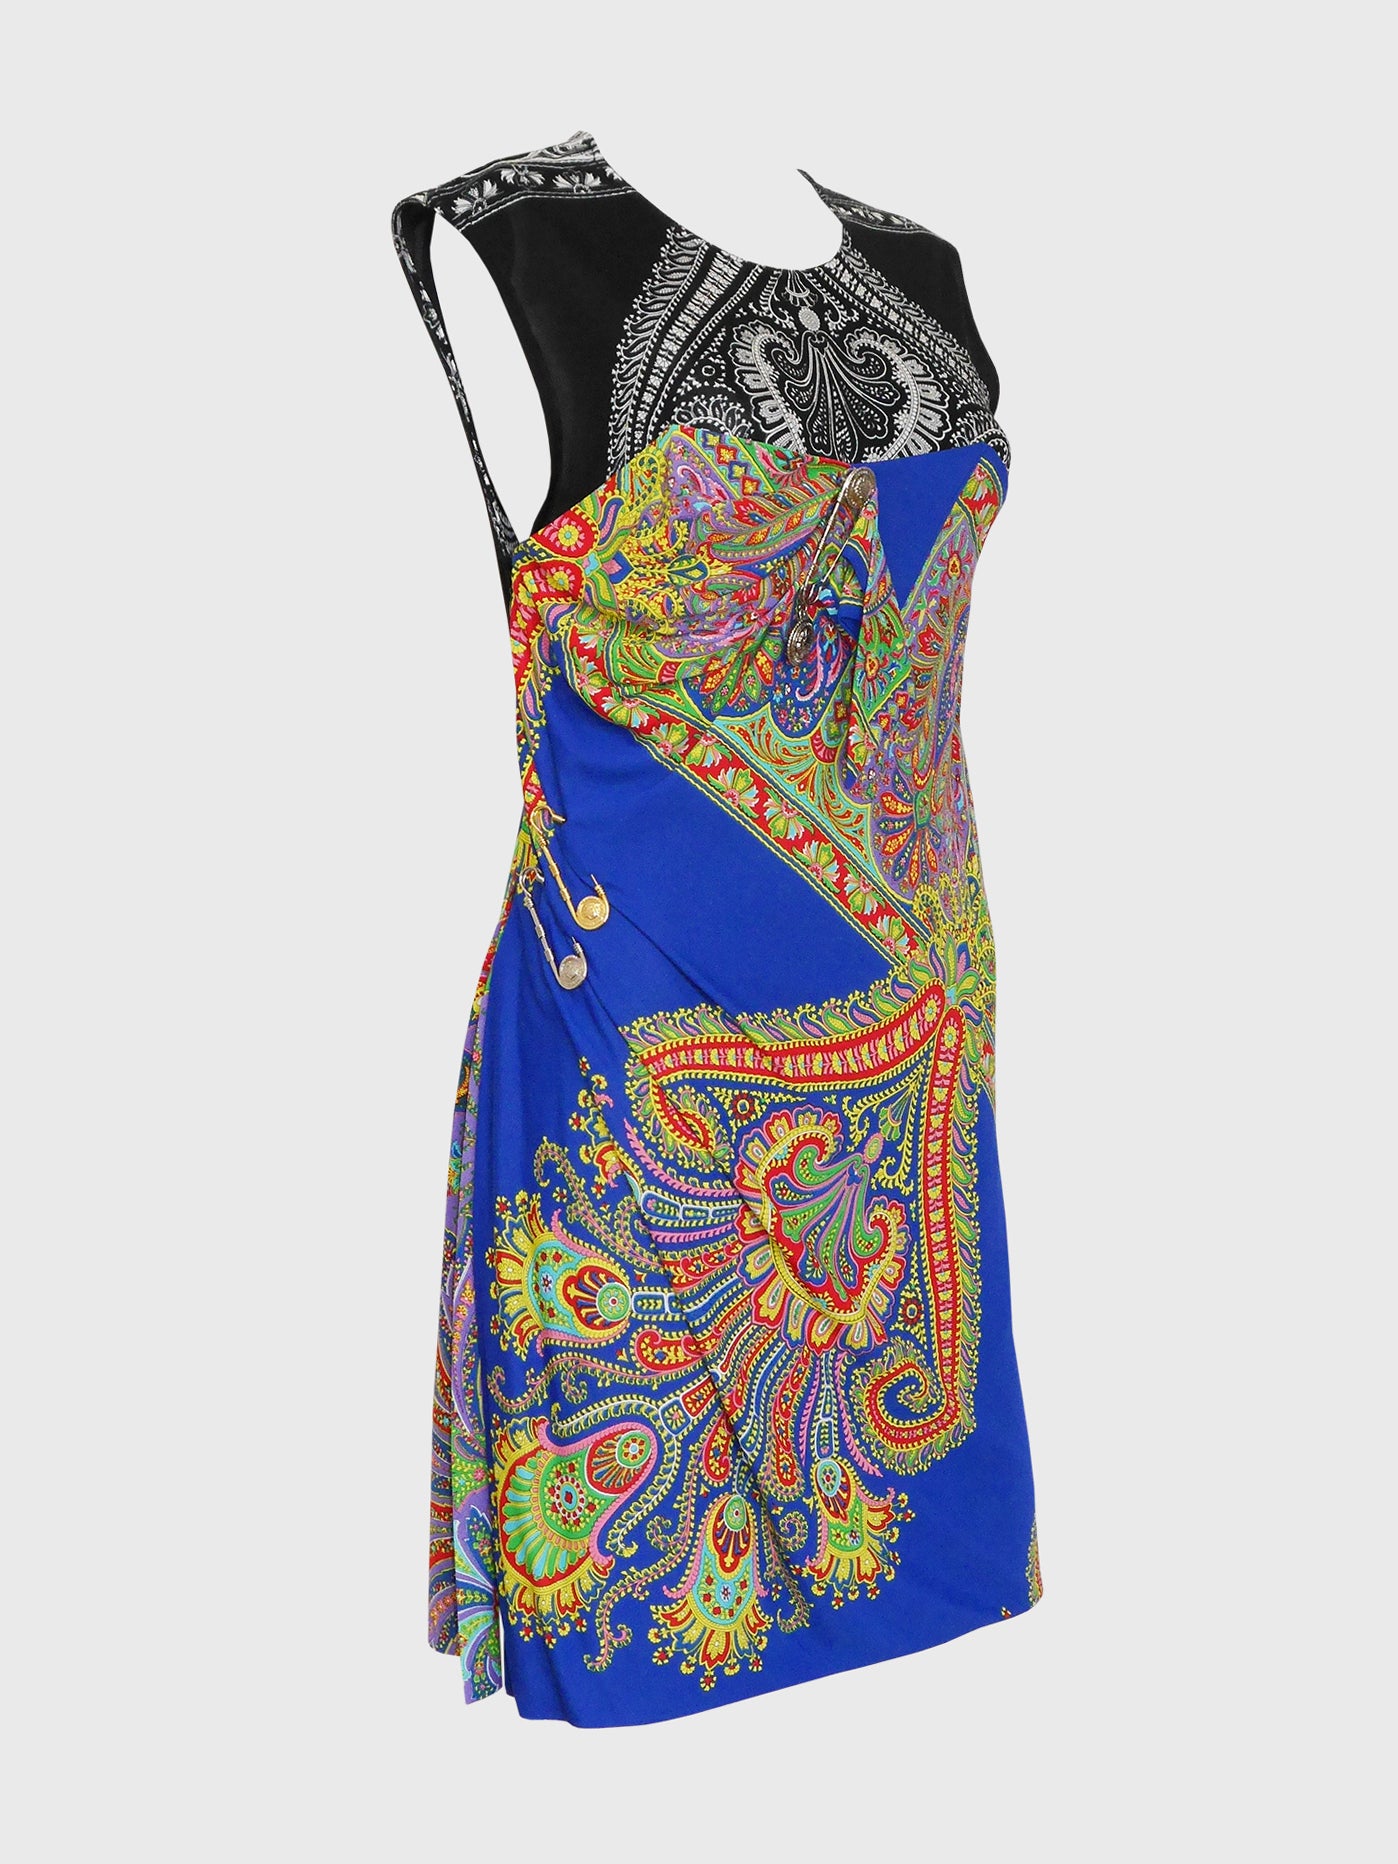 GIANNI VERSACE Couture Spring 1994 Safety Pin Paisley Print Mini Dress Size M